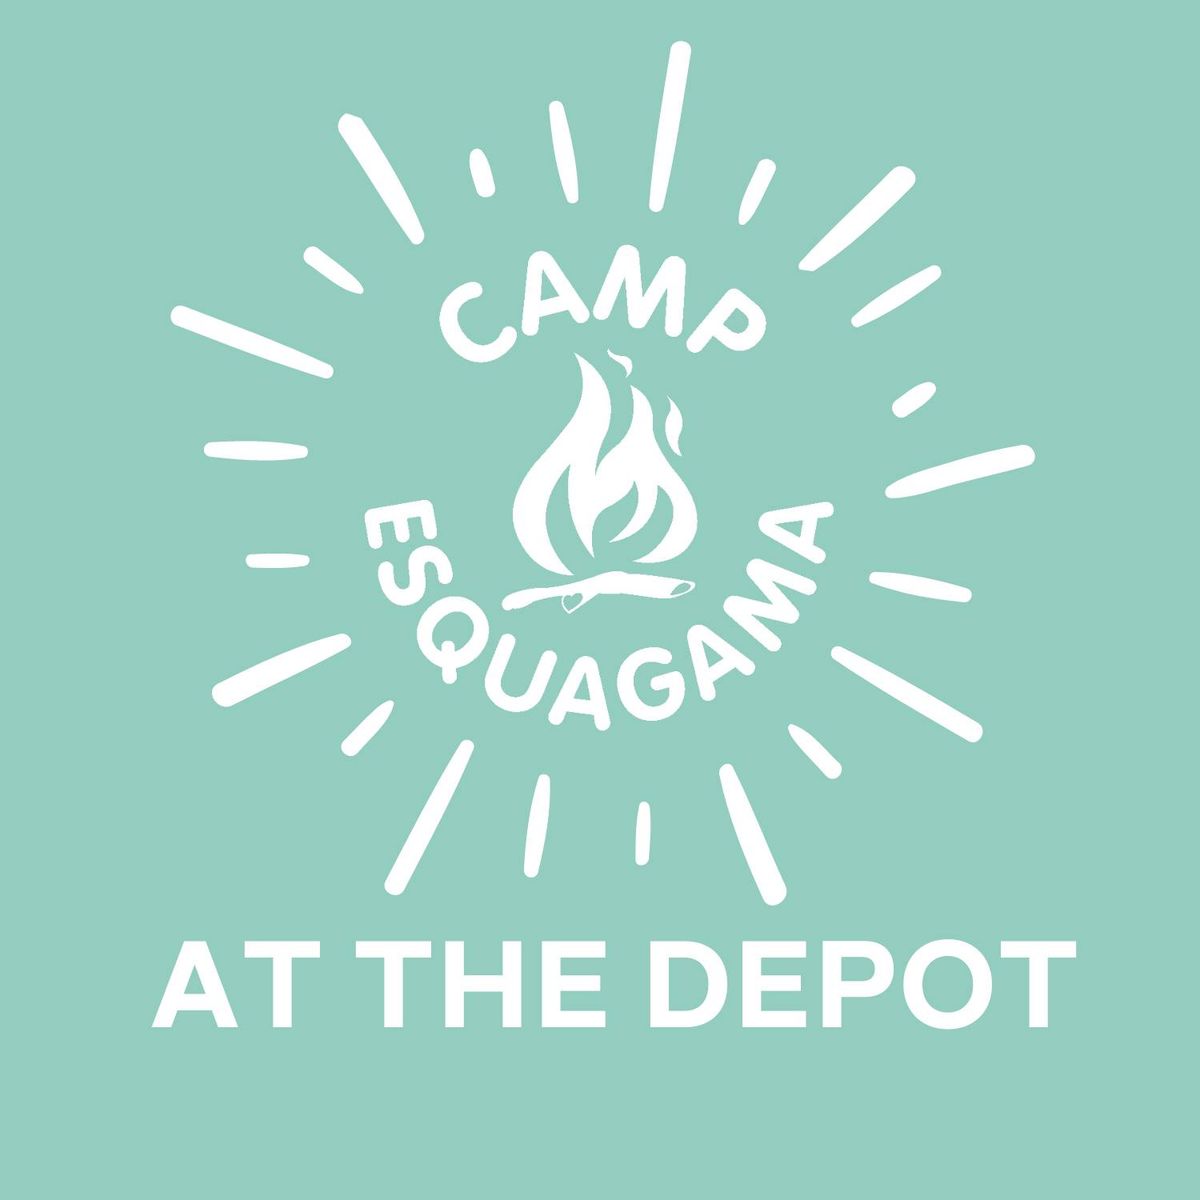 Camp E Day at The Depot!